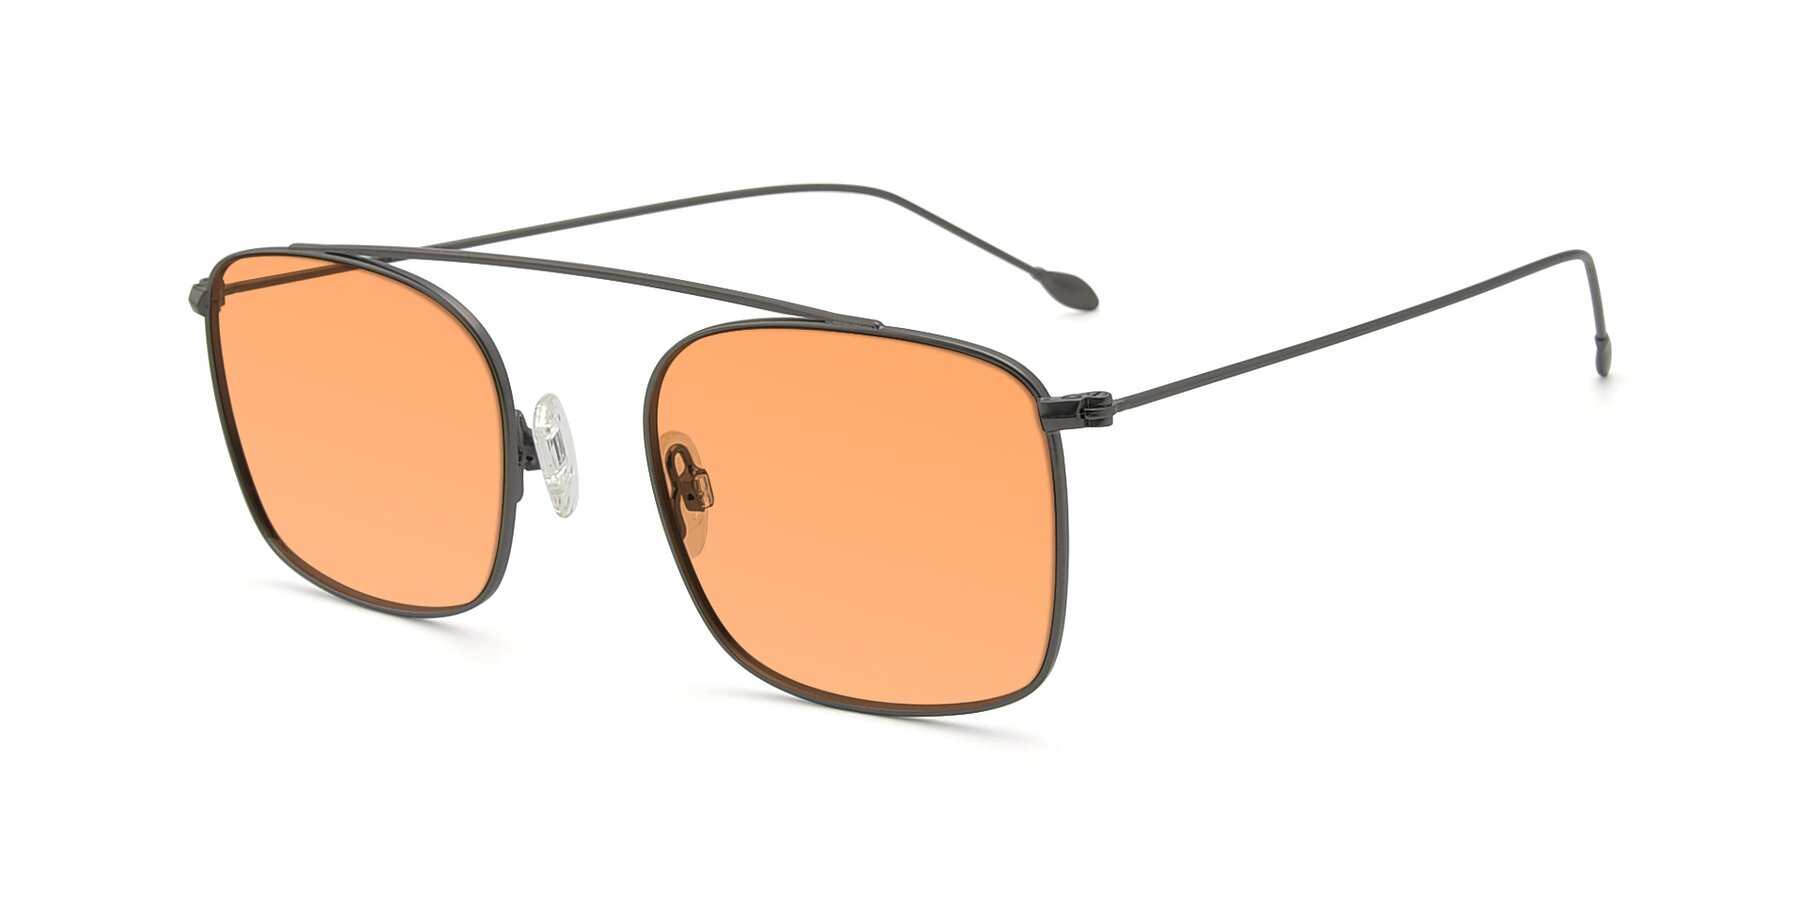 Angle of The Librarian in Gunmetal with Medium Orange Tinted Lenses